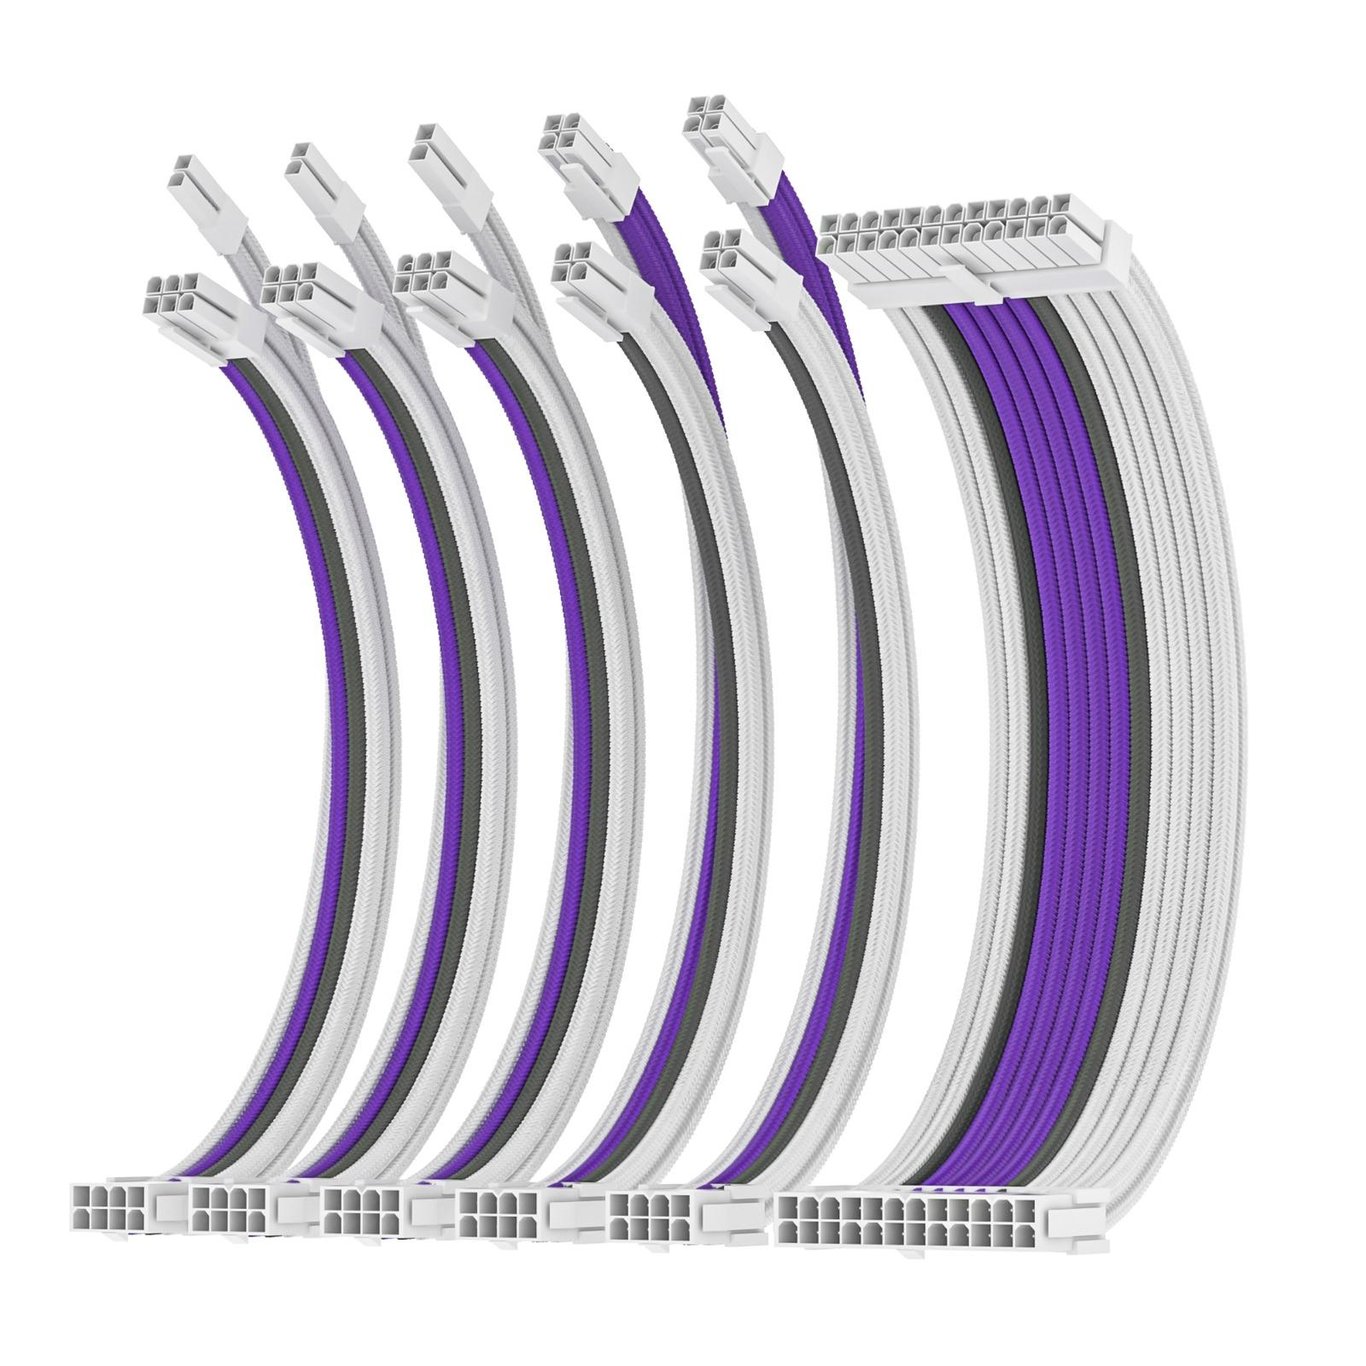 AsiaHorse Pro-6 Sleeved Extension Cable Kit - Snow Violet 雪紫色